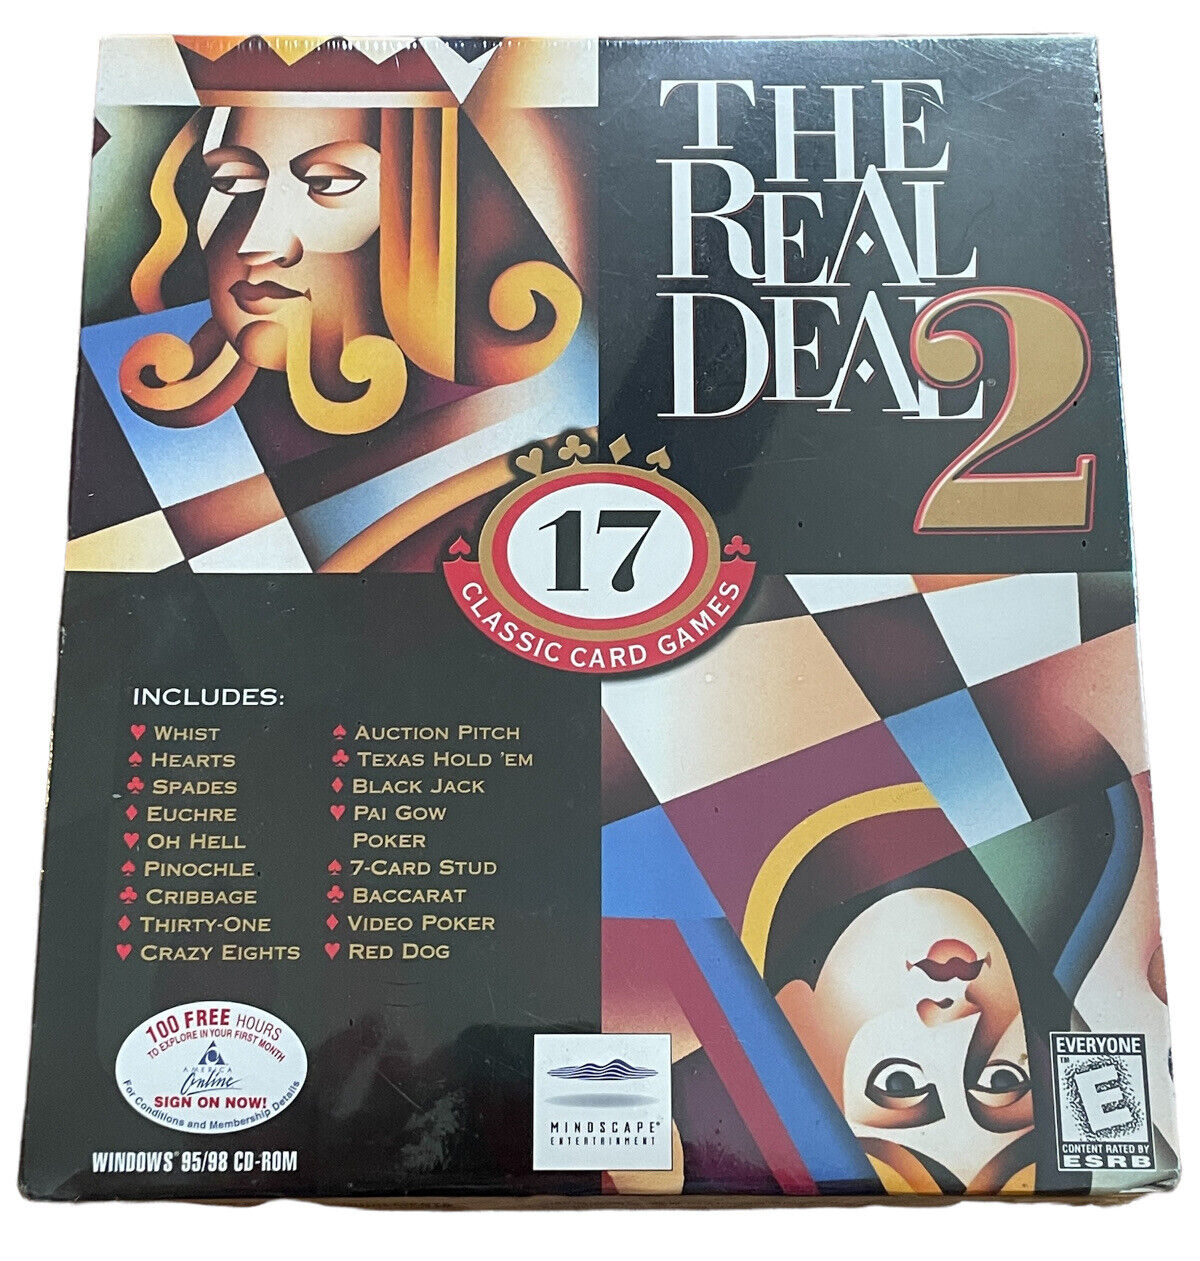 The Real Deal 2 17 Classic Card Games PC CD-ROM Mindscape Windows 95/98 new